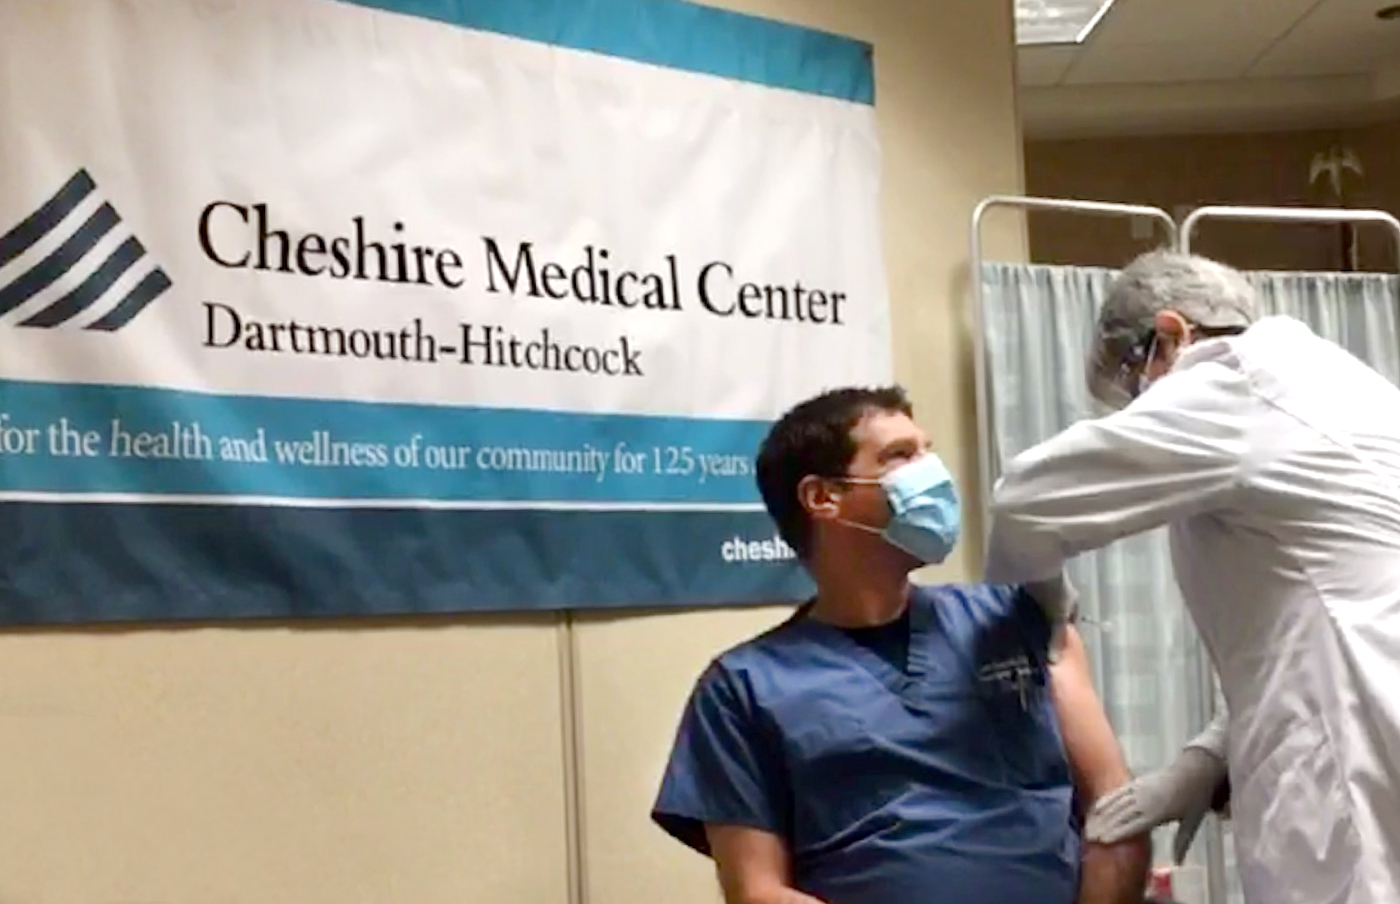 Receiving vaccination at Cheshire Medical Center